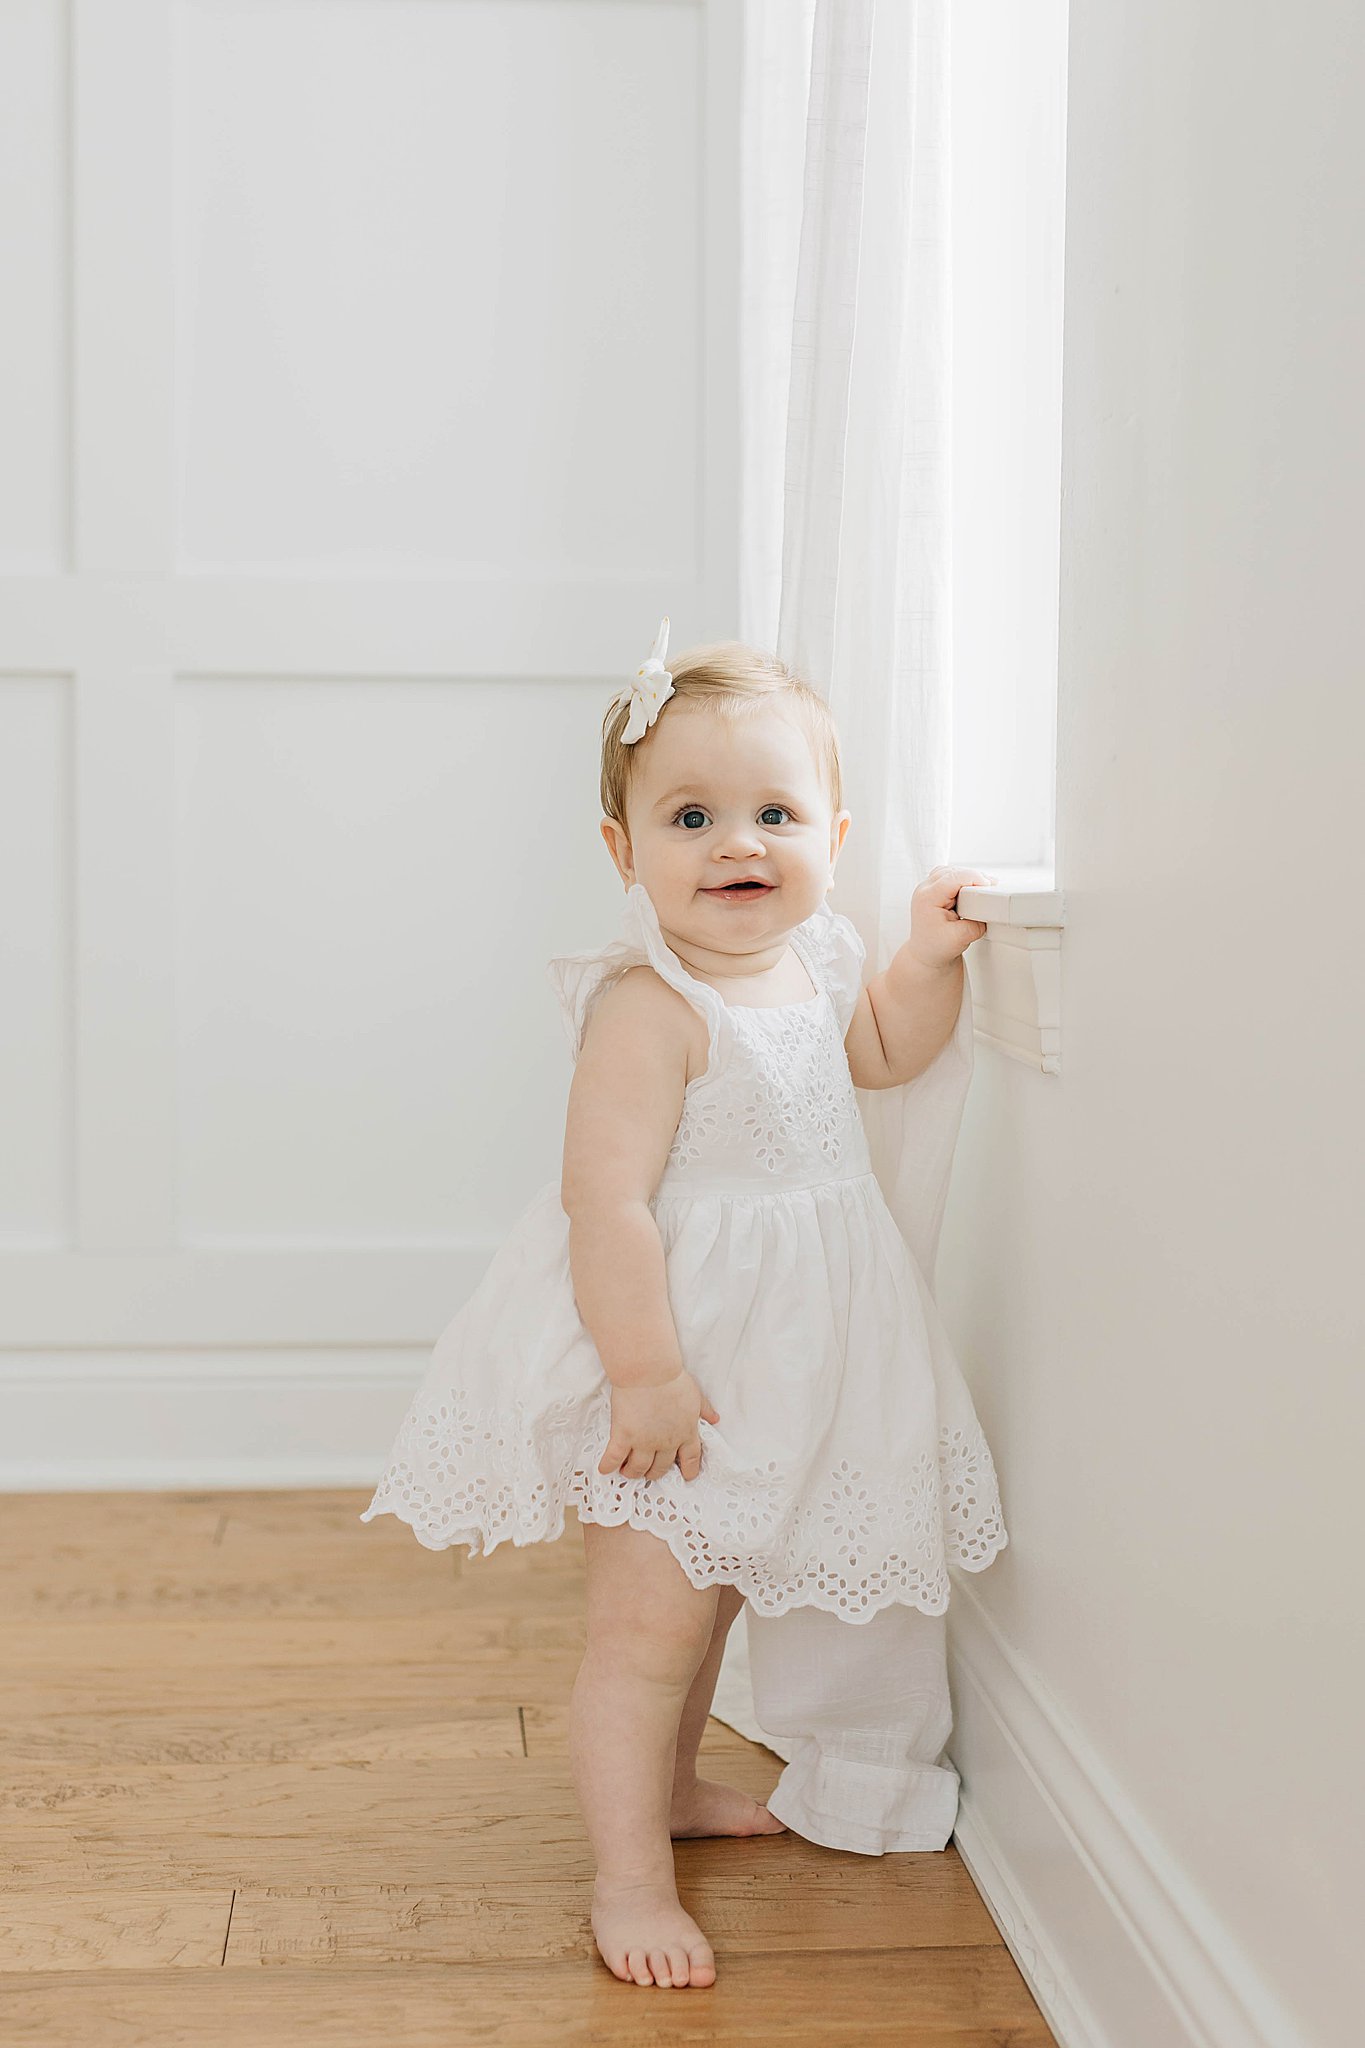 Baby standing and smiling during one year milestone portraits.